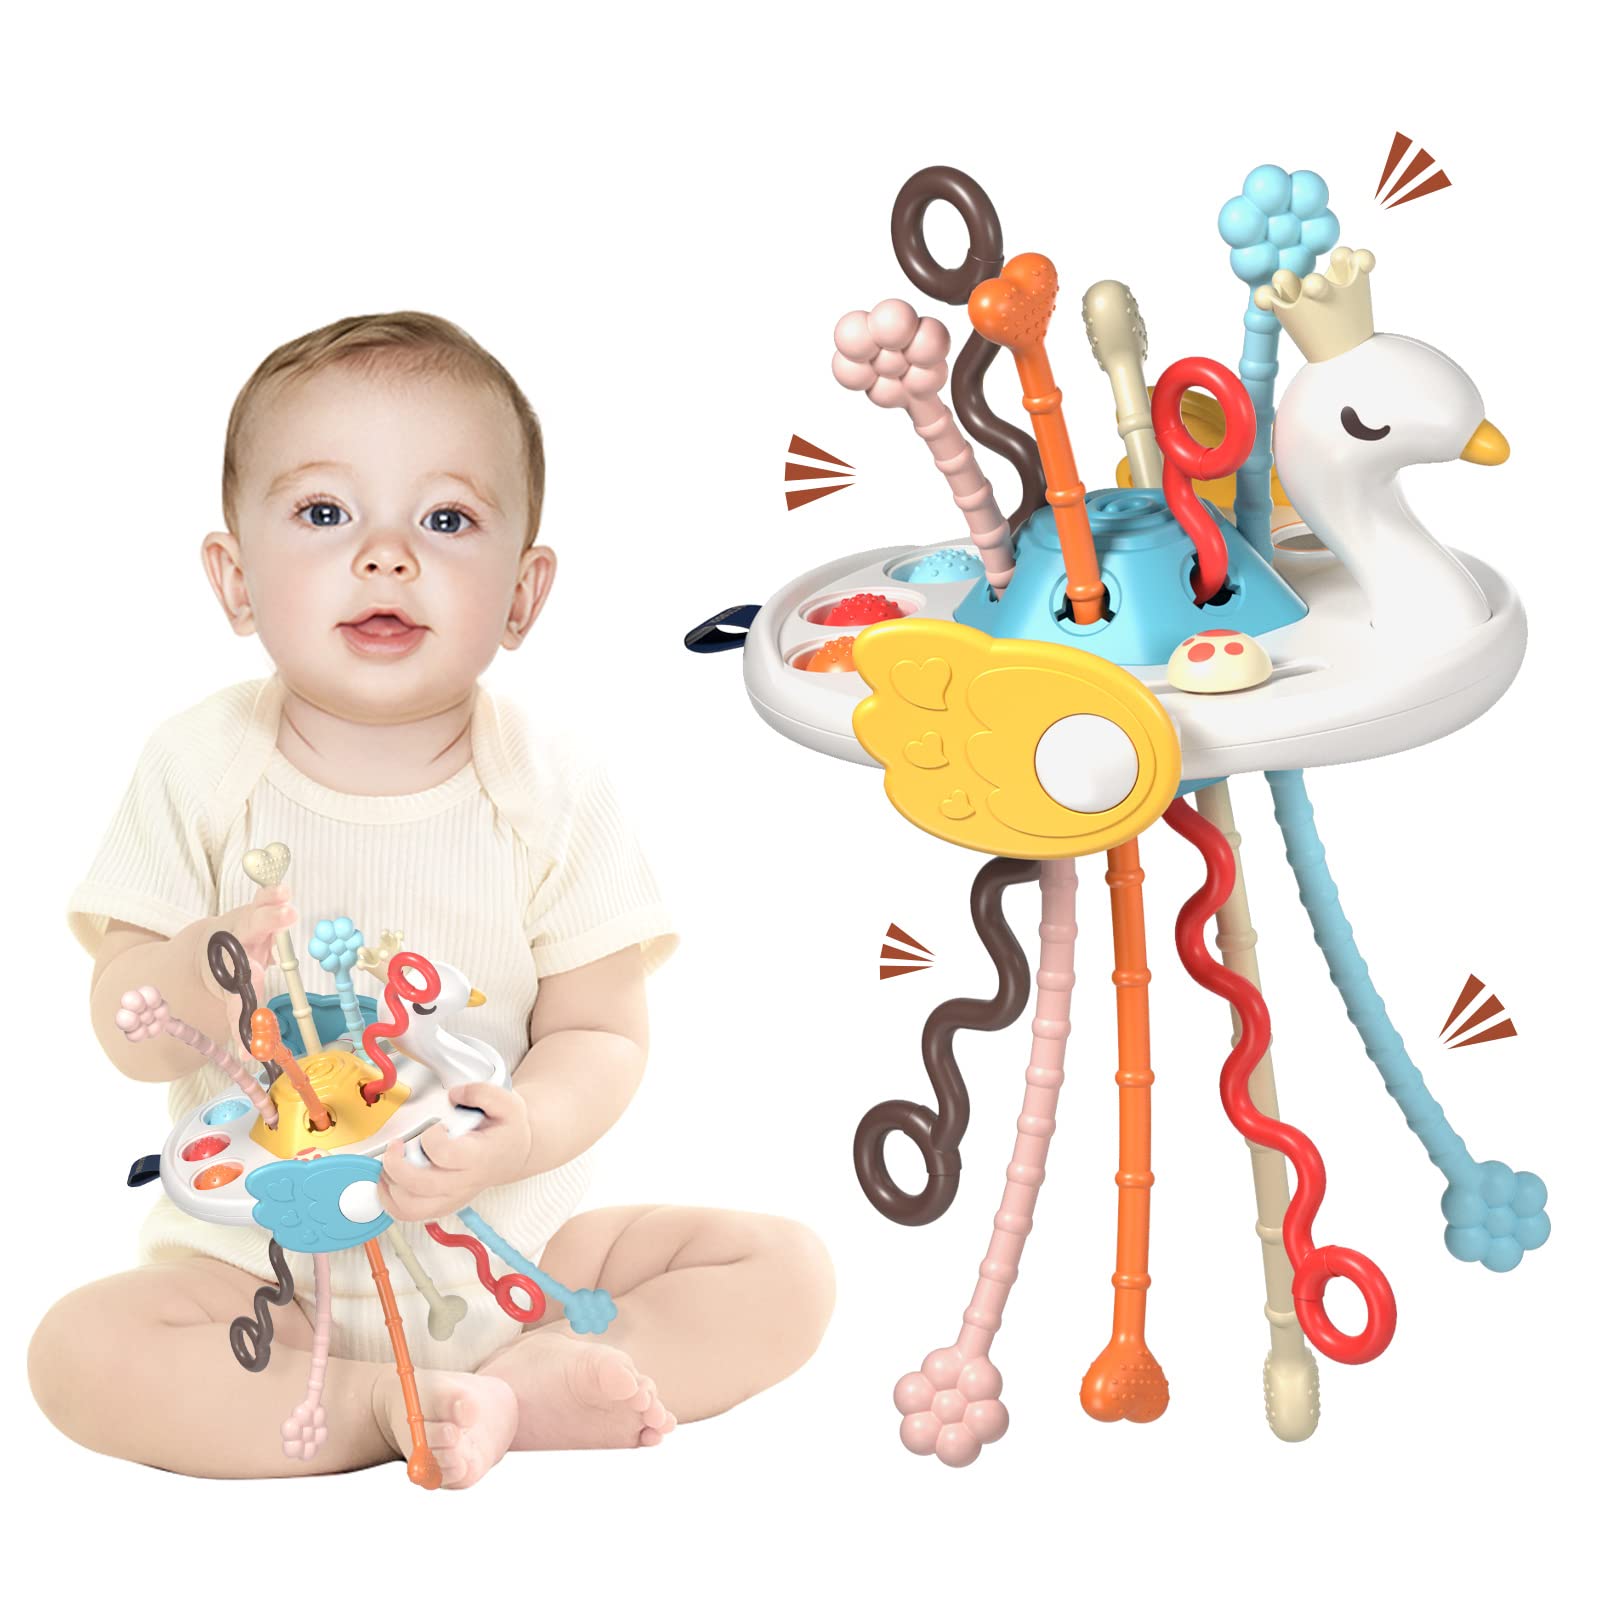 Montessori Toys for 1+ Year Old, Sensory Toys for Toddlers, Food Grade Silicone Infant Swan Pull String Activitys, Exercise Baby's Finger Motor, Fun Car Seat Travel Toddler Boy & Girl Birthday Gifts